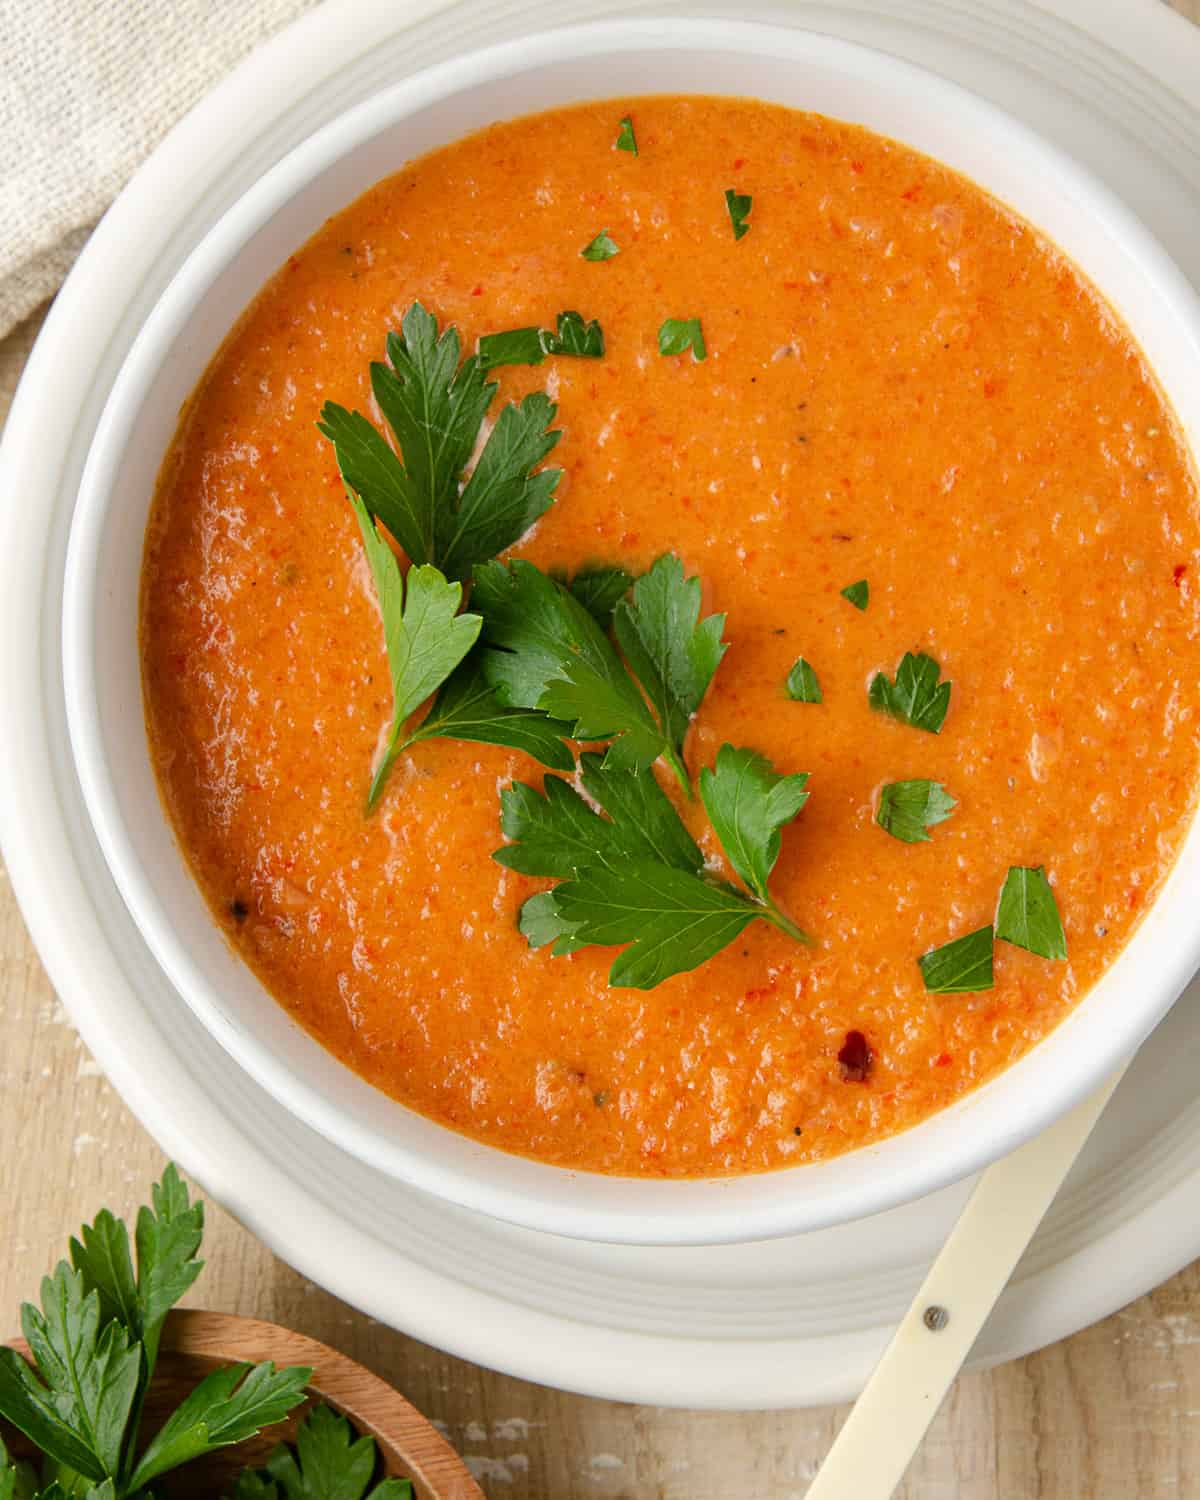 A close up of a bowl of roasted red pepper soup.